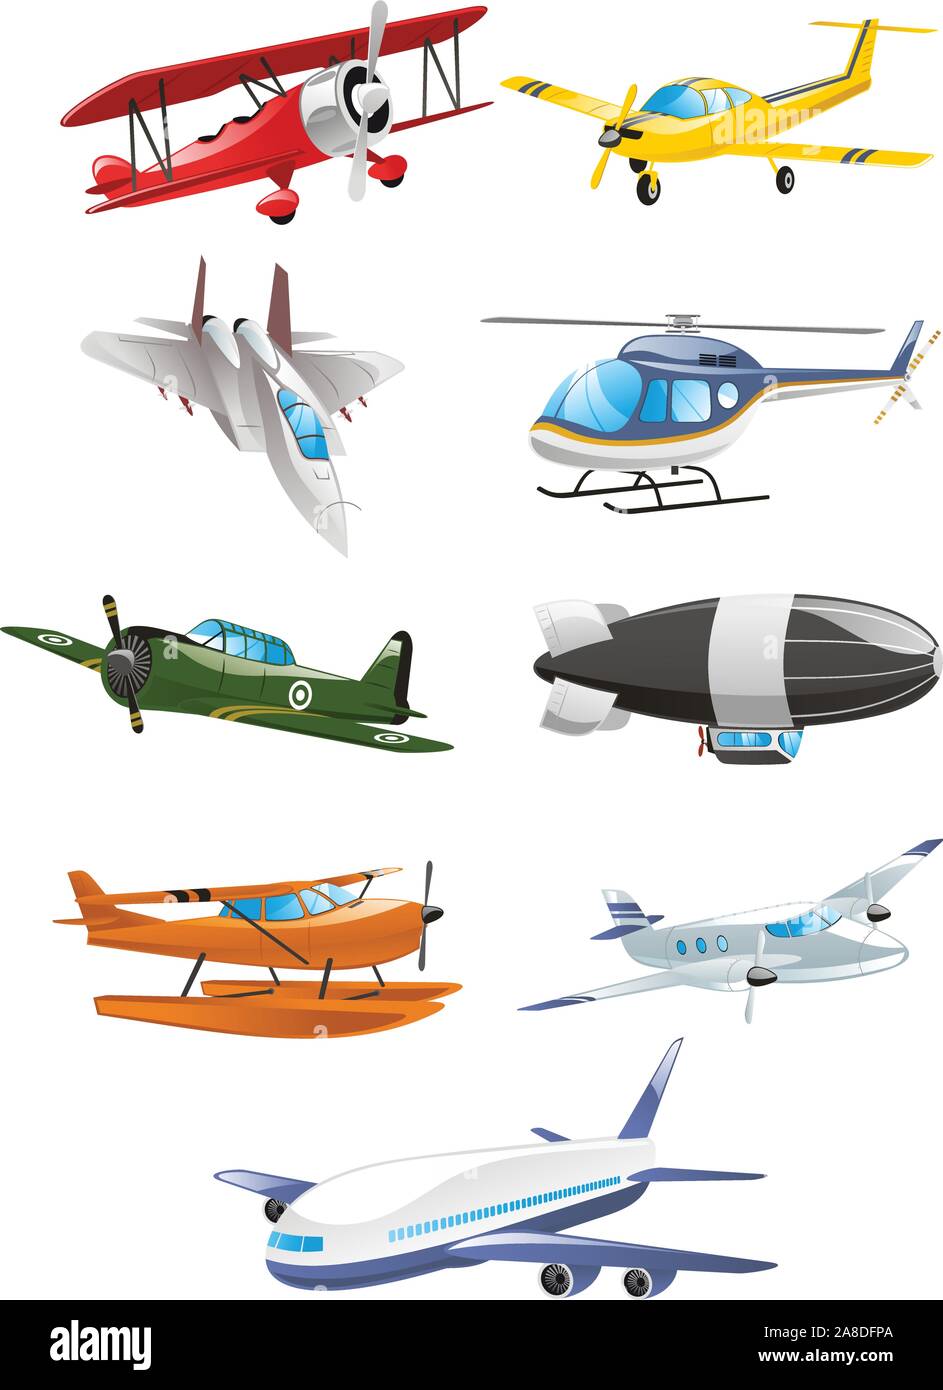 Airplane collection, with aircraft, airbus, airliner, large gasbags, airship, fixed wing aircraft, monoplane, biplane, rotary wing aircraft, gliders, Stock Vector